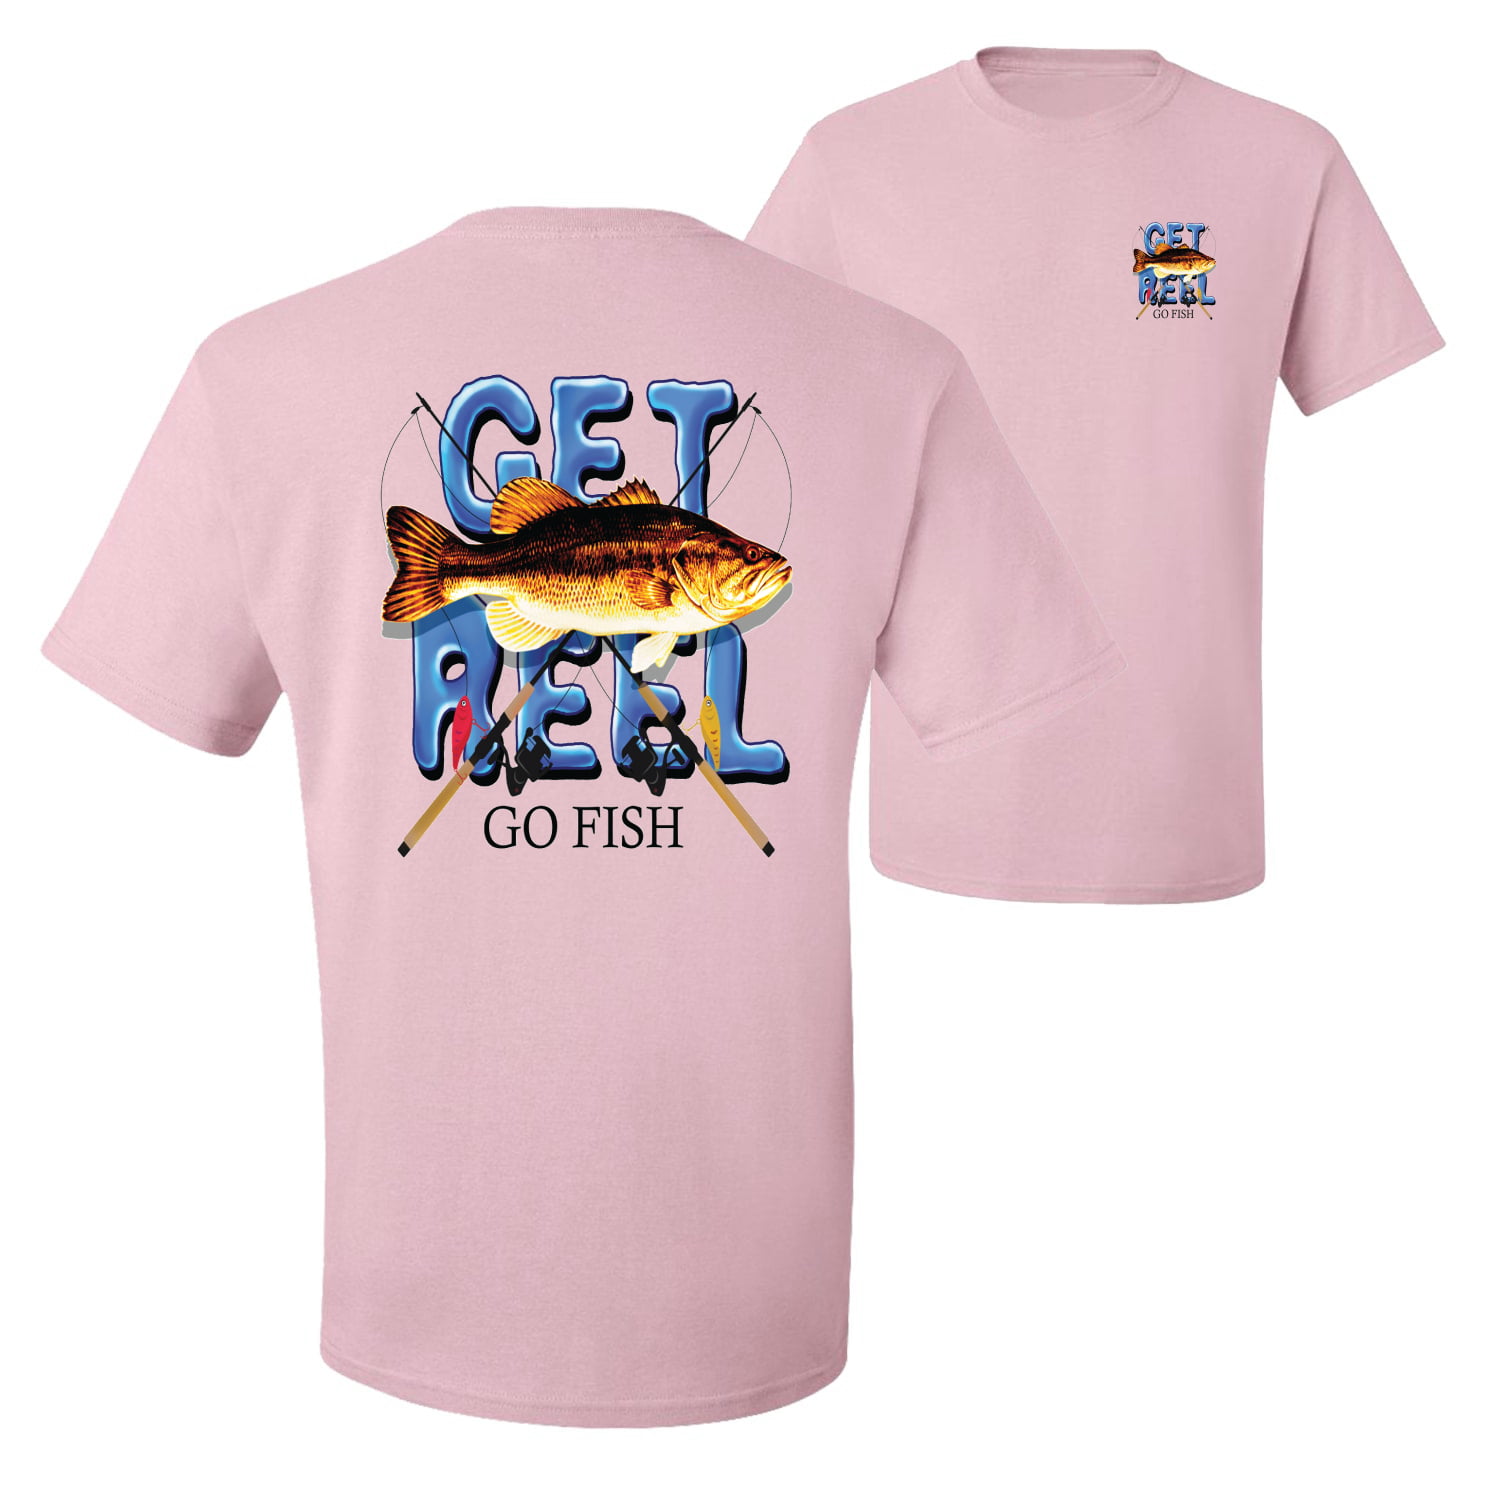 Wild Bobby,Get Reel Go Fish Fishing Front and Back Men's Graphic T-Shirt,  Light Blue, X-Large